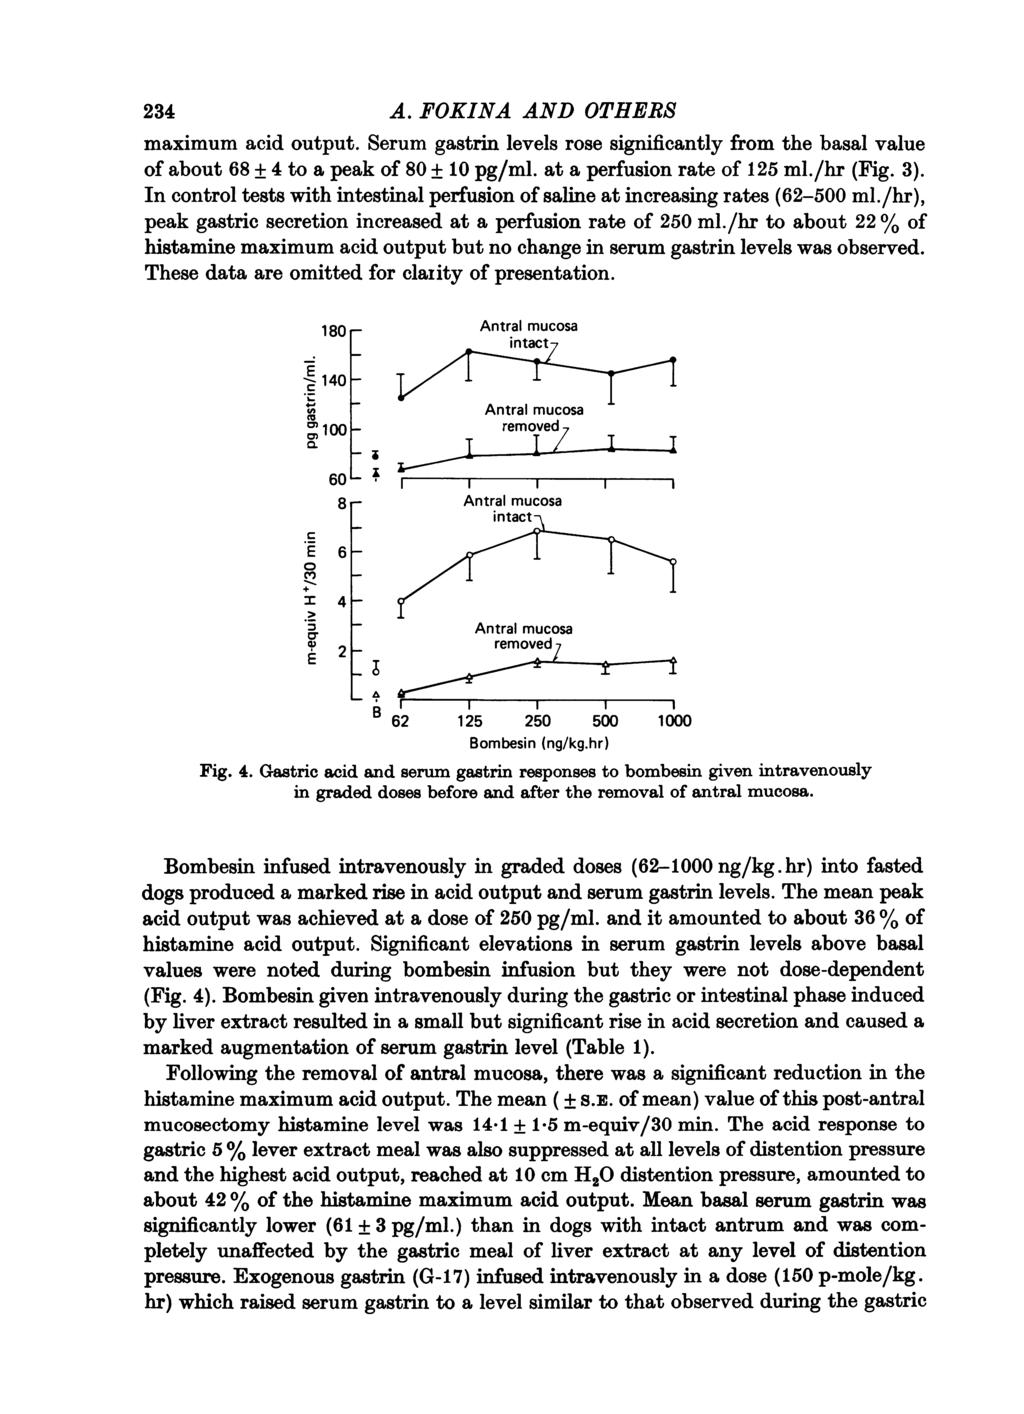 234 A. FOKINA AND OTHERS maximum acid output. Serum gastrin levels rose significantly from the basal value of about 68 + 4 to a peak of 80 + 10 pg/ml. at a perfusion rate of 125 ml./hr (Fig. 3).